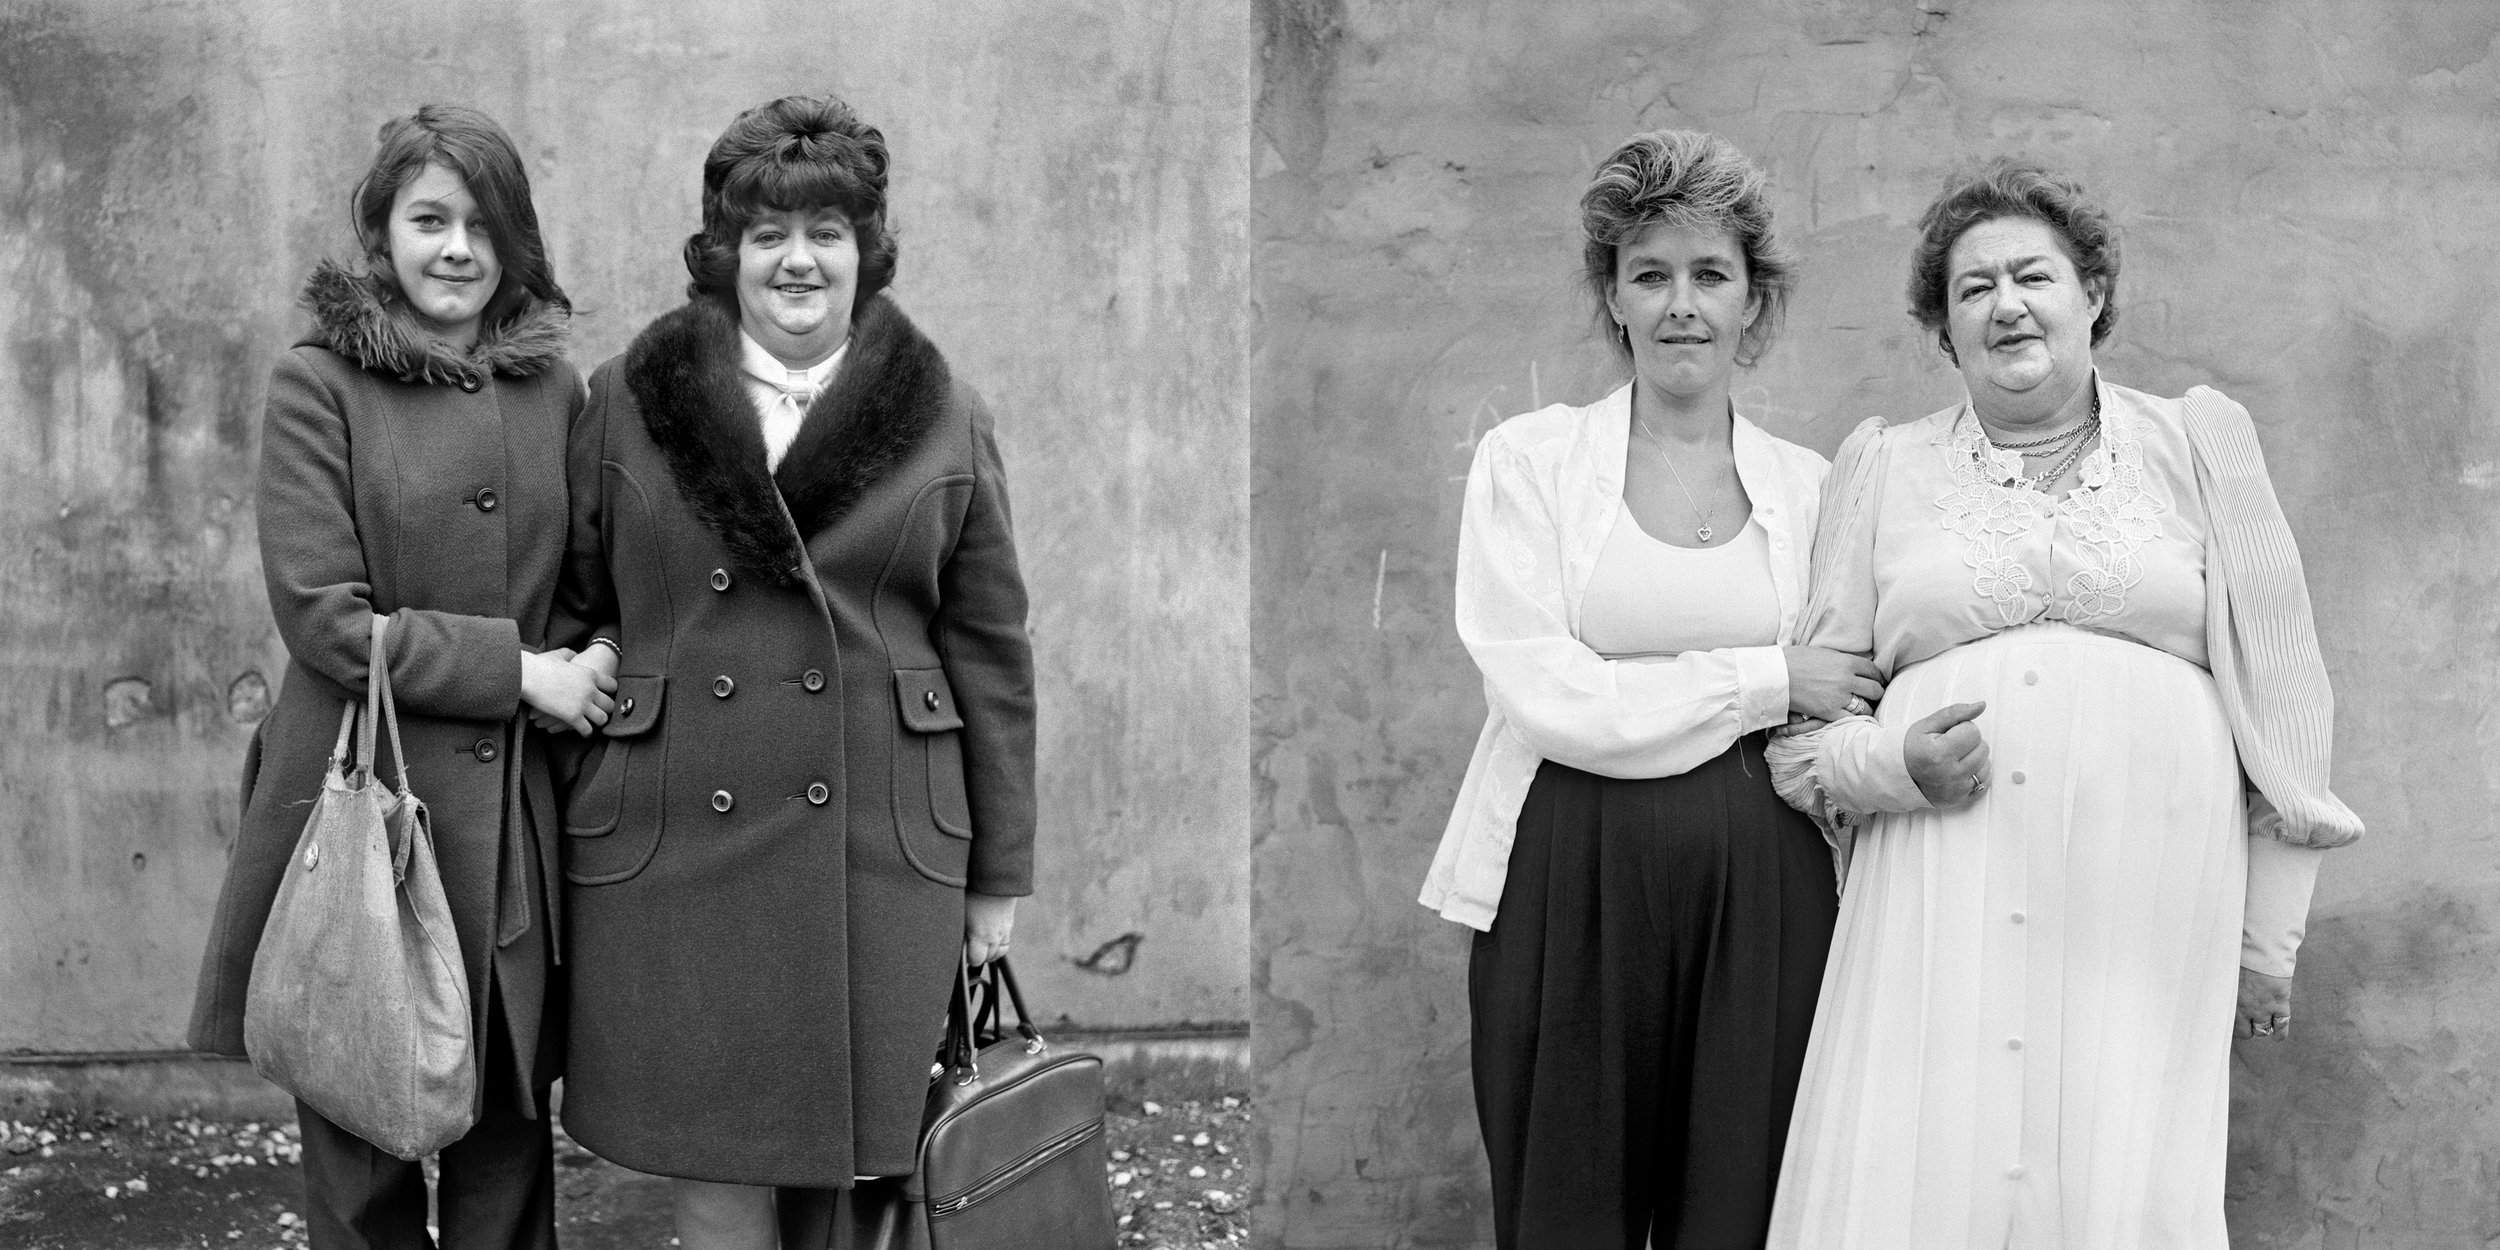  Now and Then portrait from the   Free Photographic Omnibus  , Mother and daughter: left, Karen Cubin; right, Barbara Taylor, Barrow-in-Furness, Cumbria. 1974 and 1995 ©Daniel Meadows     